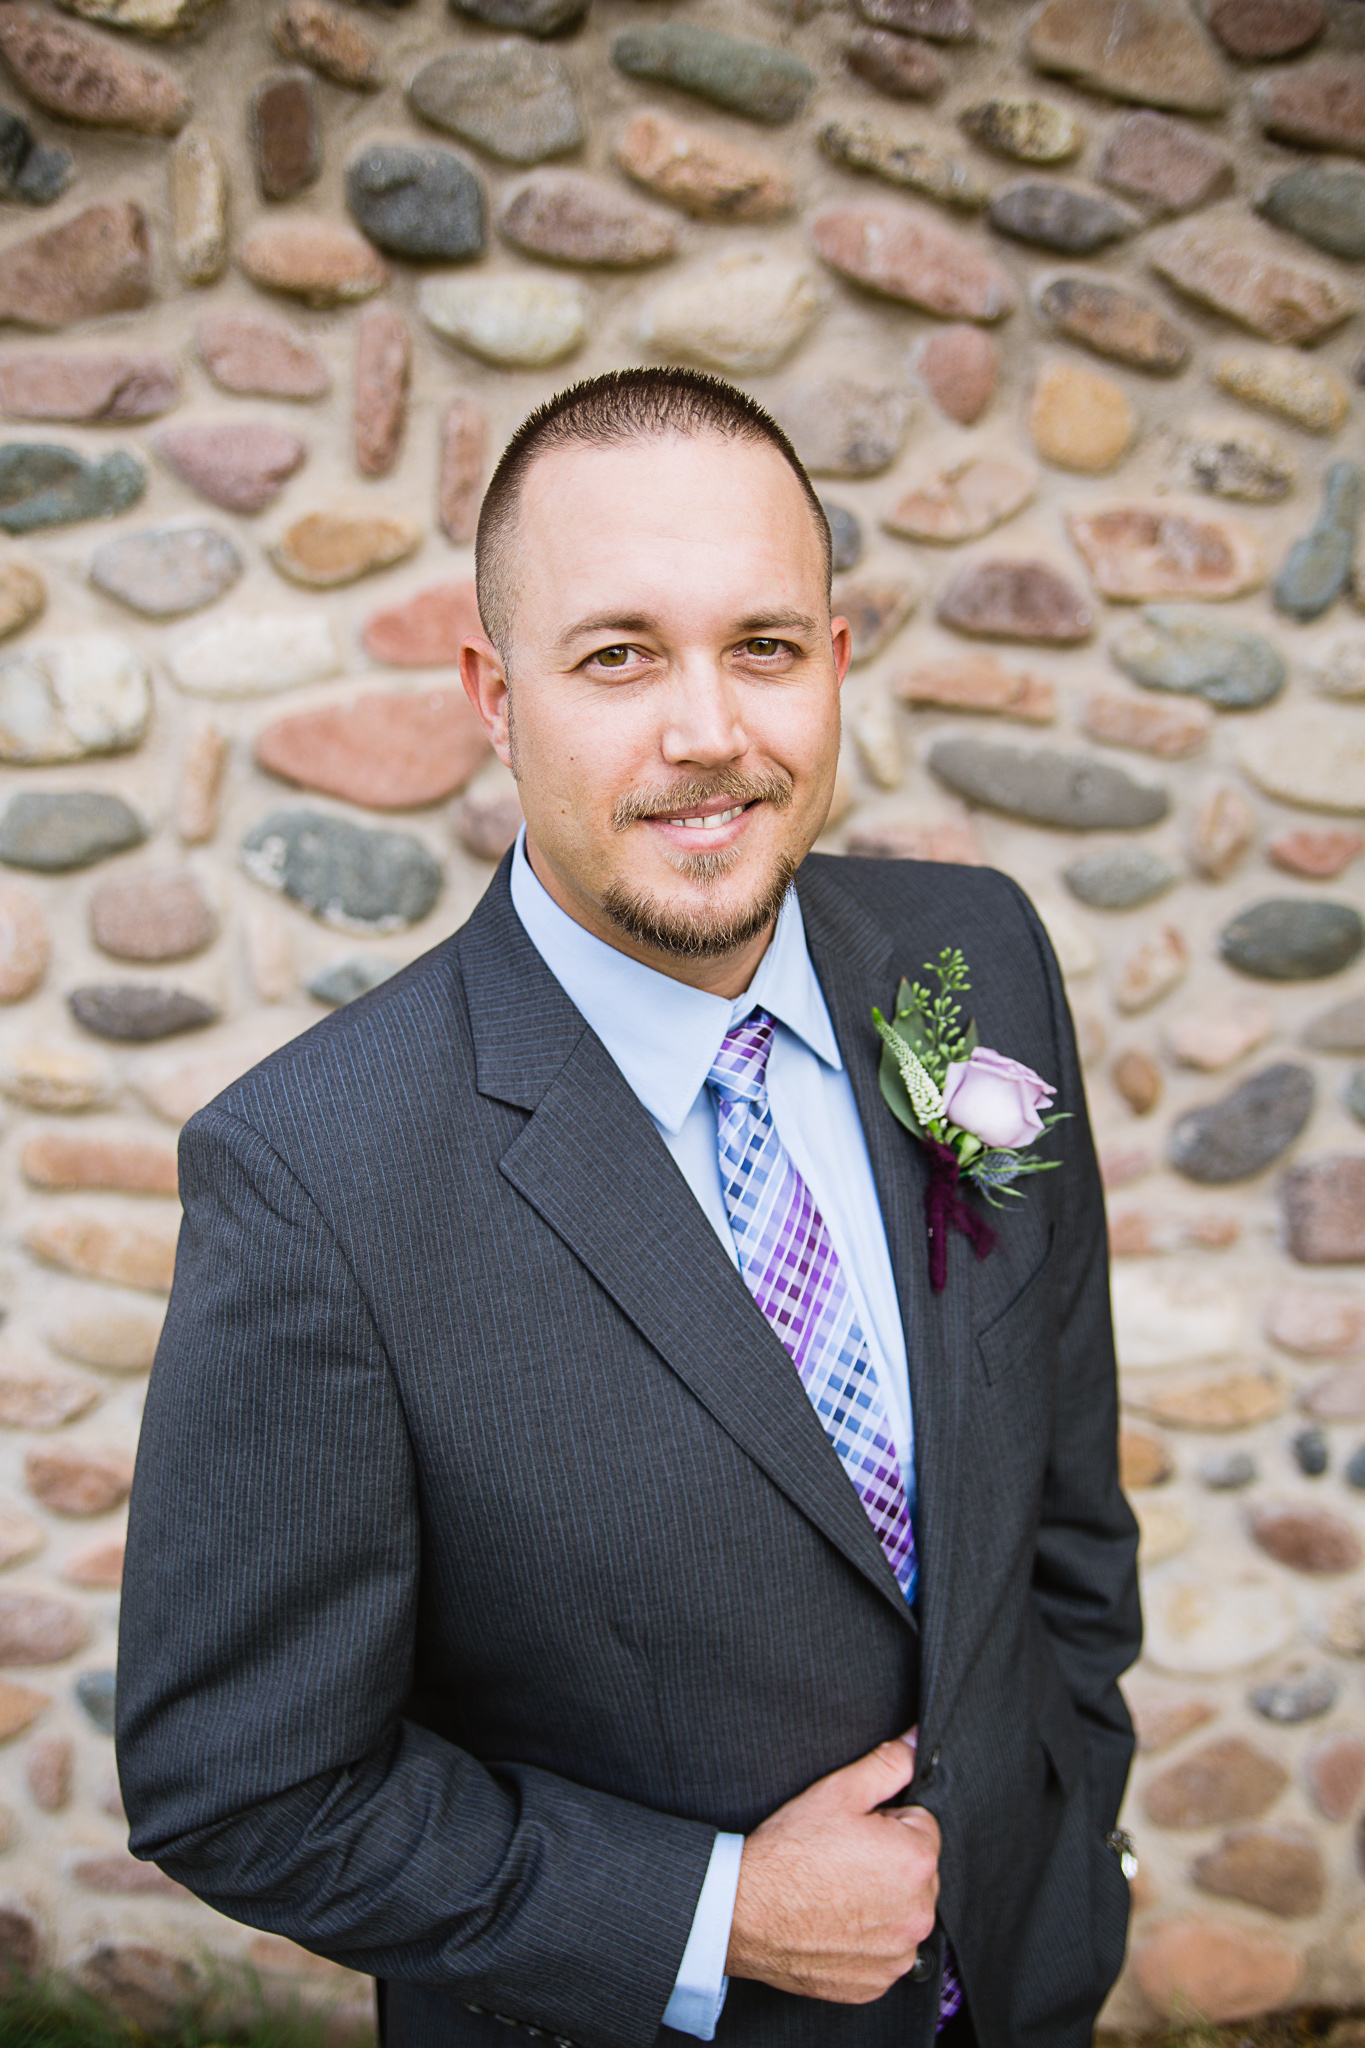 Groom in grey suit with dusty blue and lavender accents by wedding photographer PMA Photography.